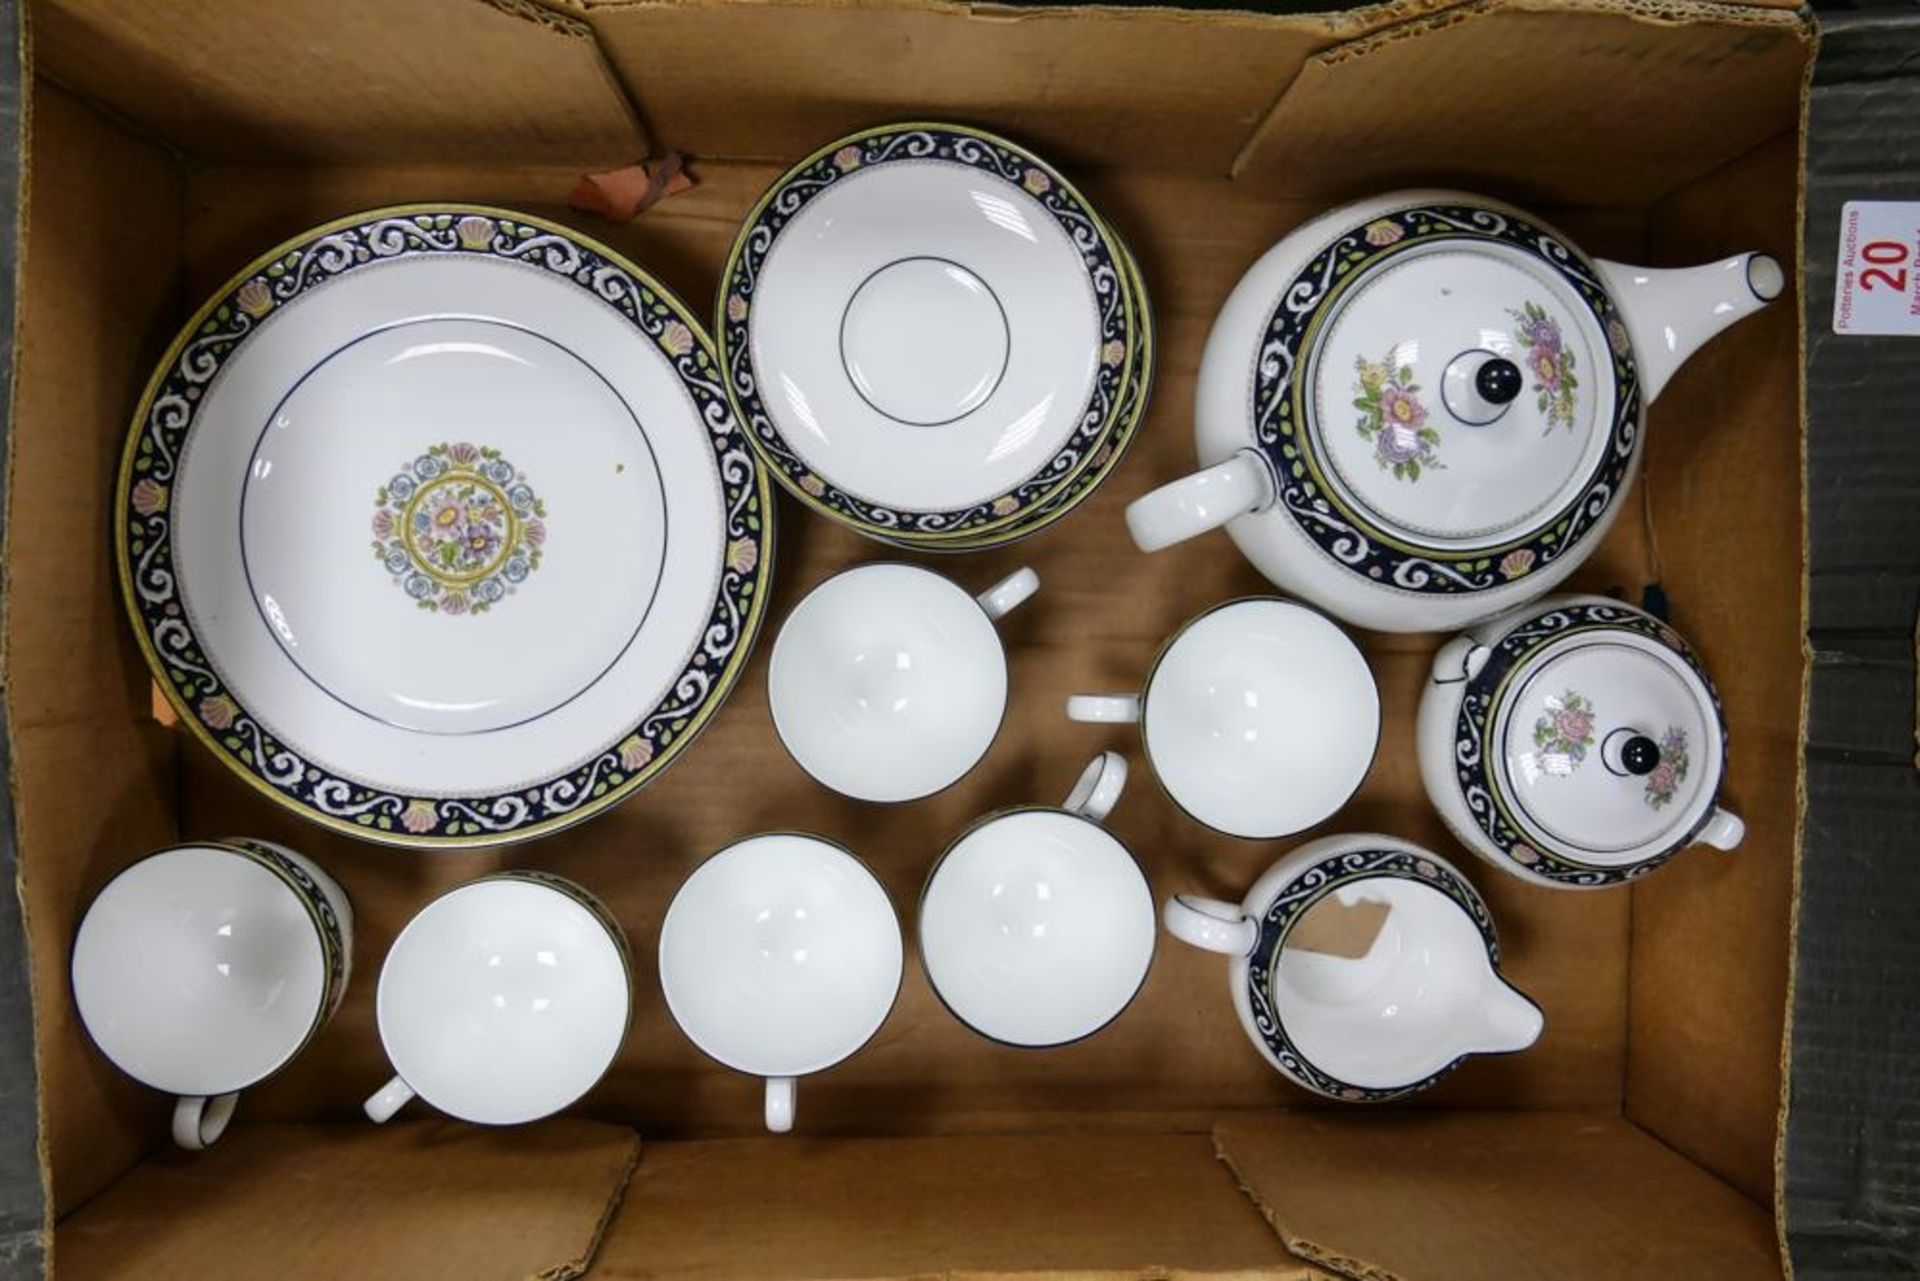 A collection of Wedgwood Runnymede patterned Cup & saucers, Salad Plates & tea service (seconds) - Image 2 of 2